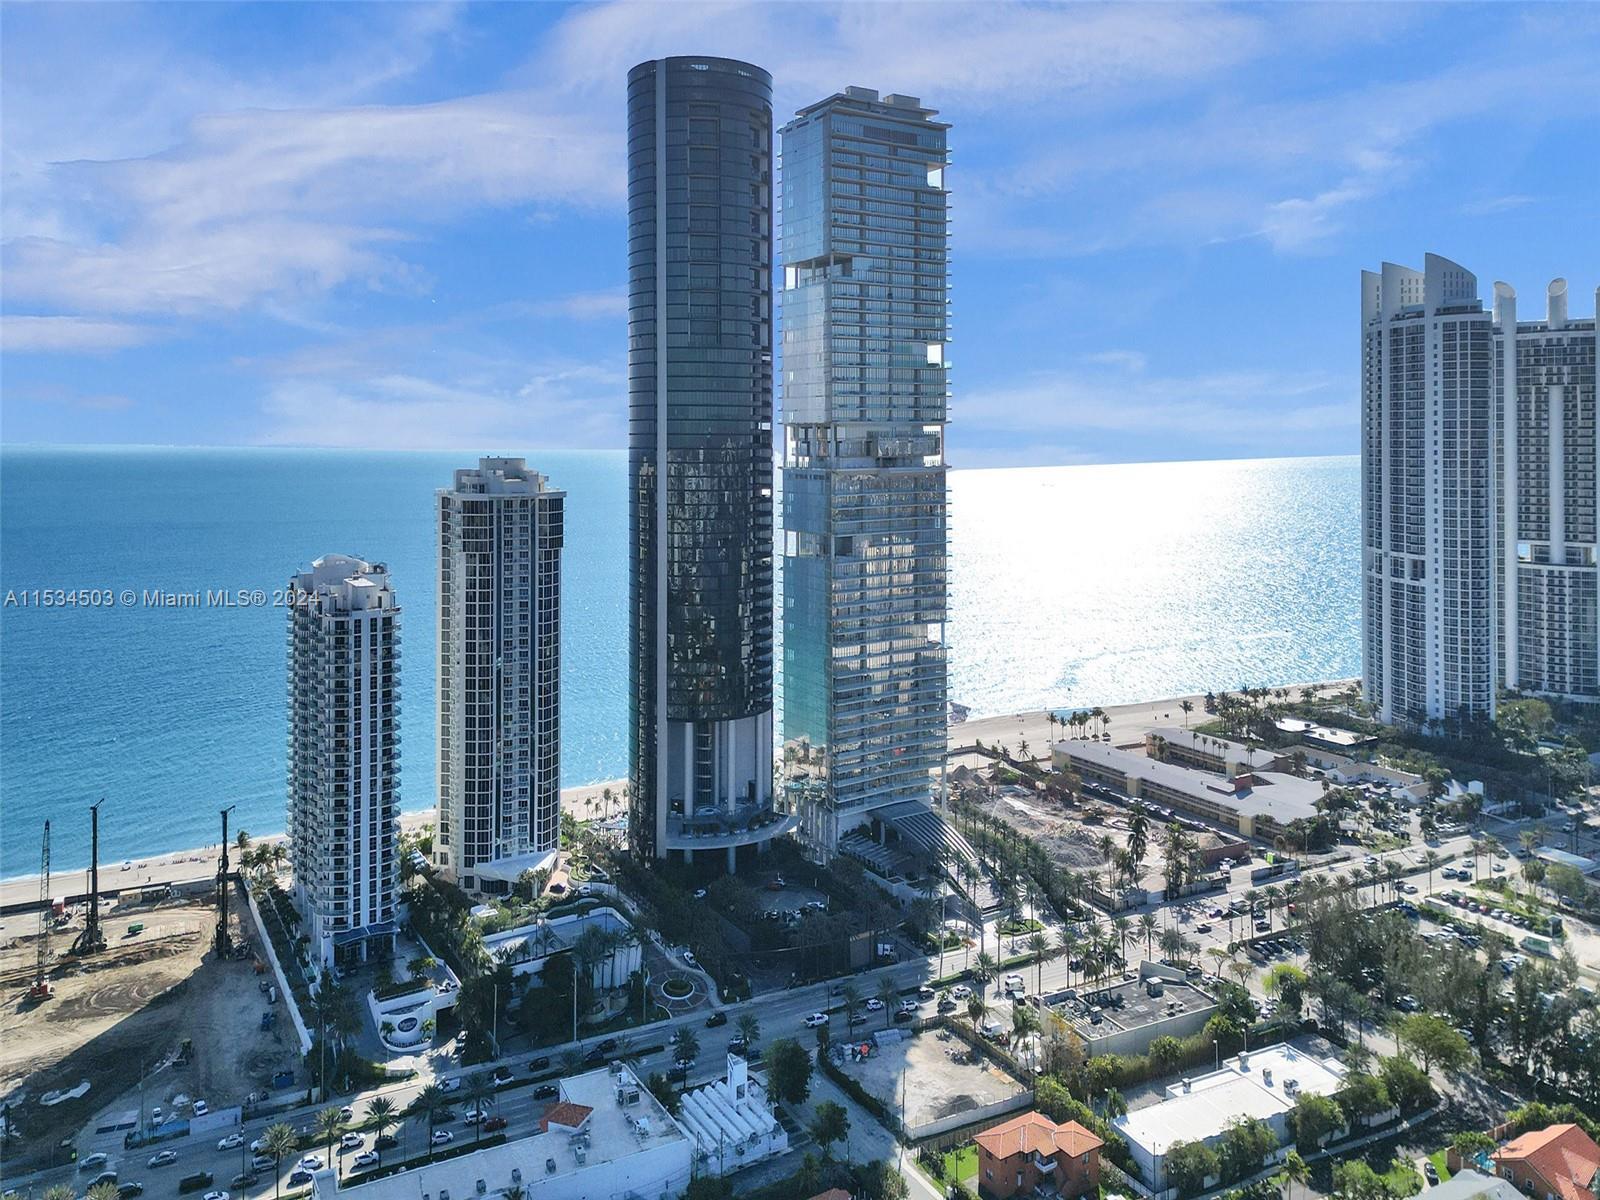 Welcome to your exclusive retreat at the prestigious Porsche Design Tower in Sunny Isles Beach. This